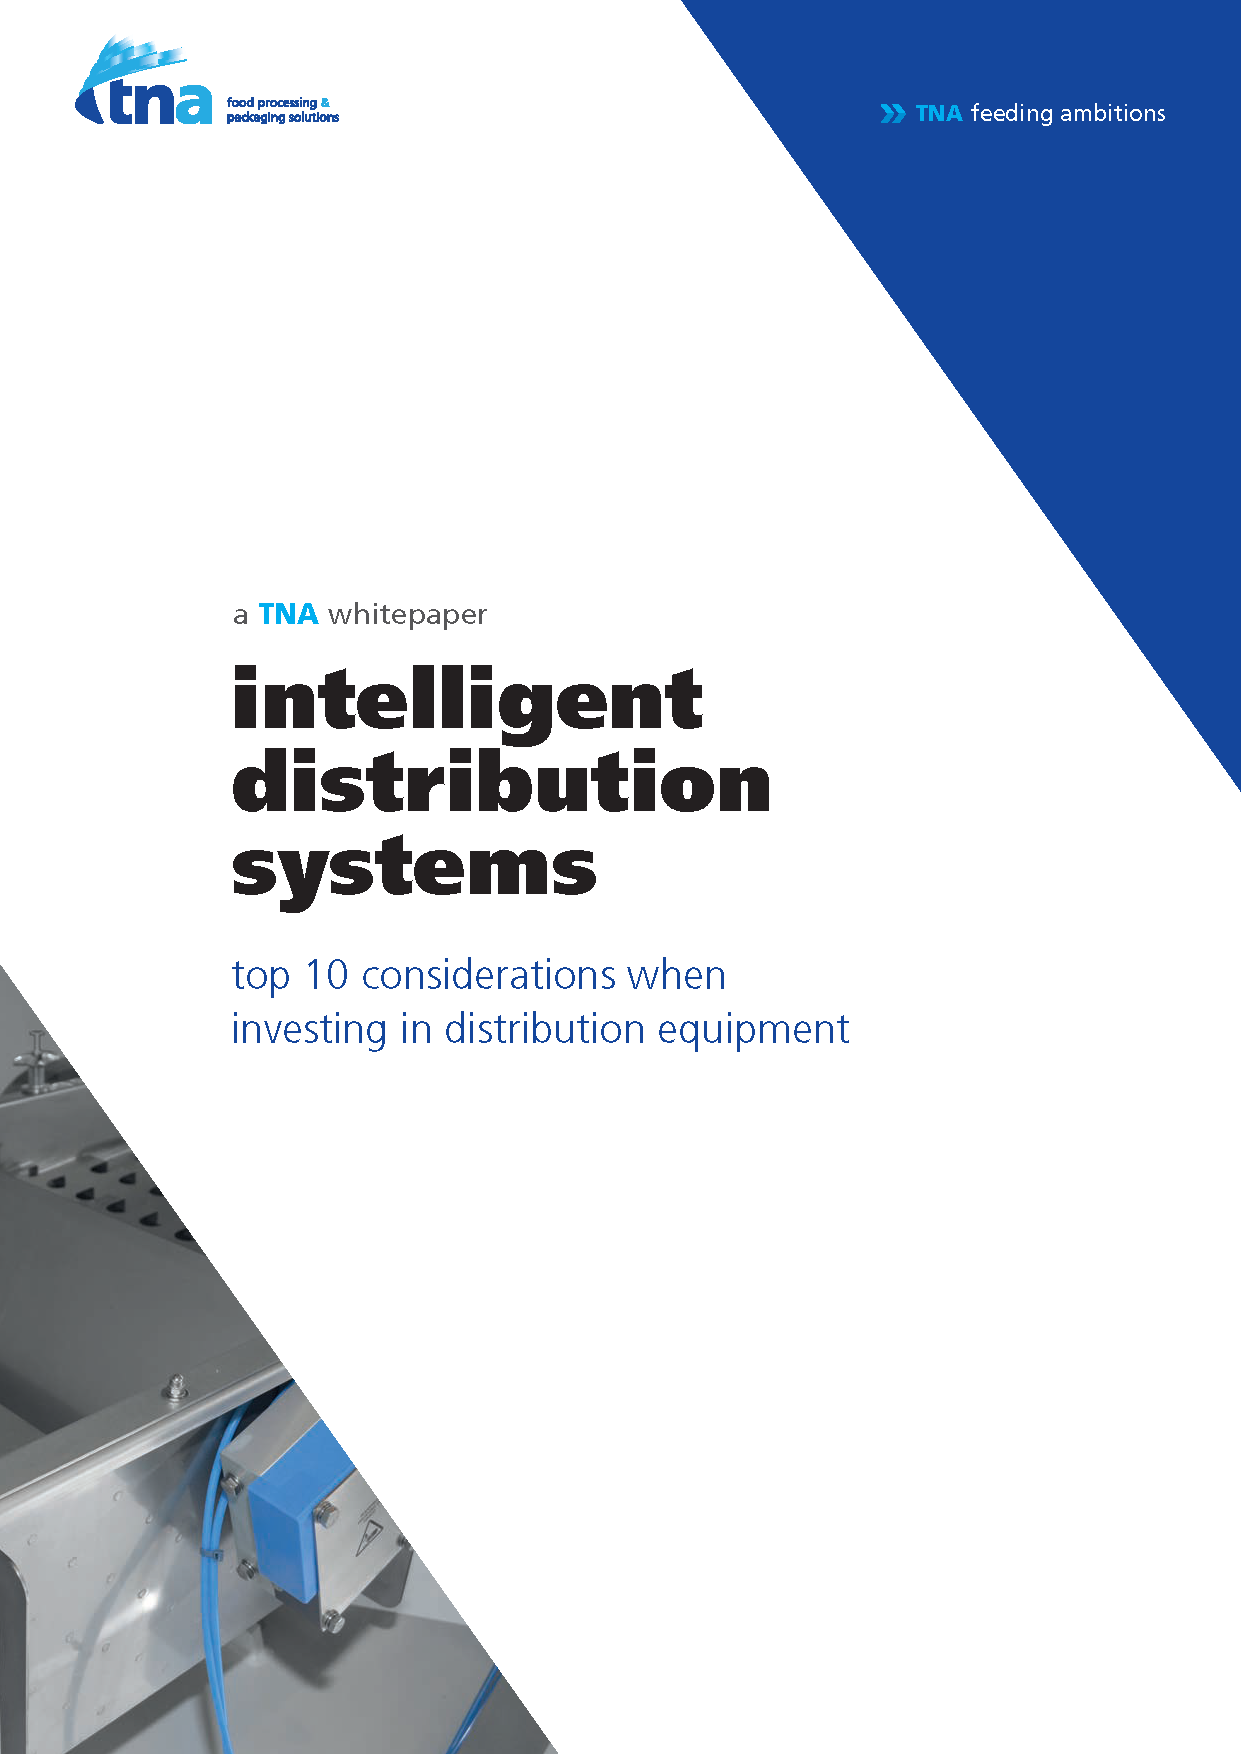 Intelligent Distribution Systems: Top 10 considerations when investing in distribution equipment